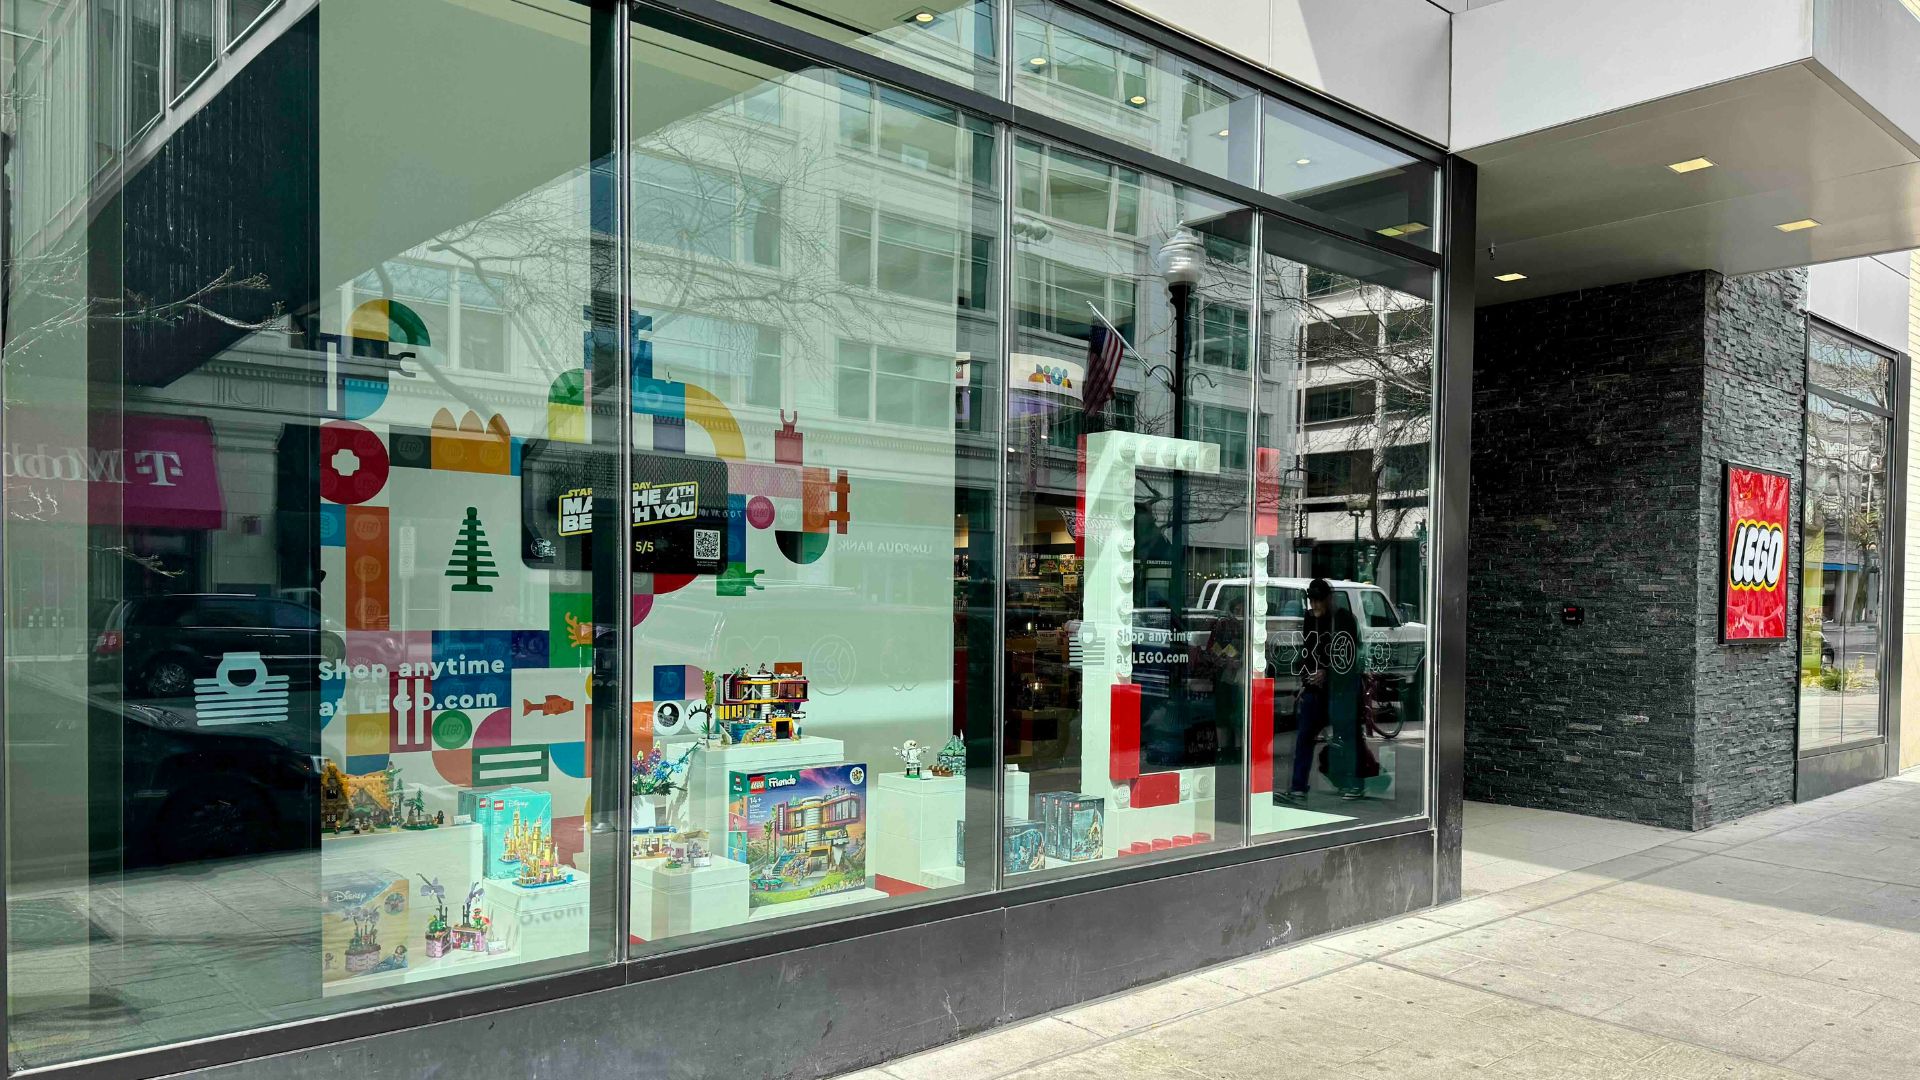 Storefront of LEGO retail shop in Downtown Spokane, showcasing colorful displays of LEGO sets and company branding in window.